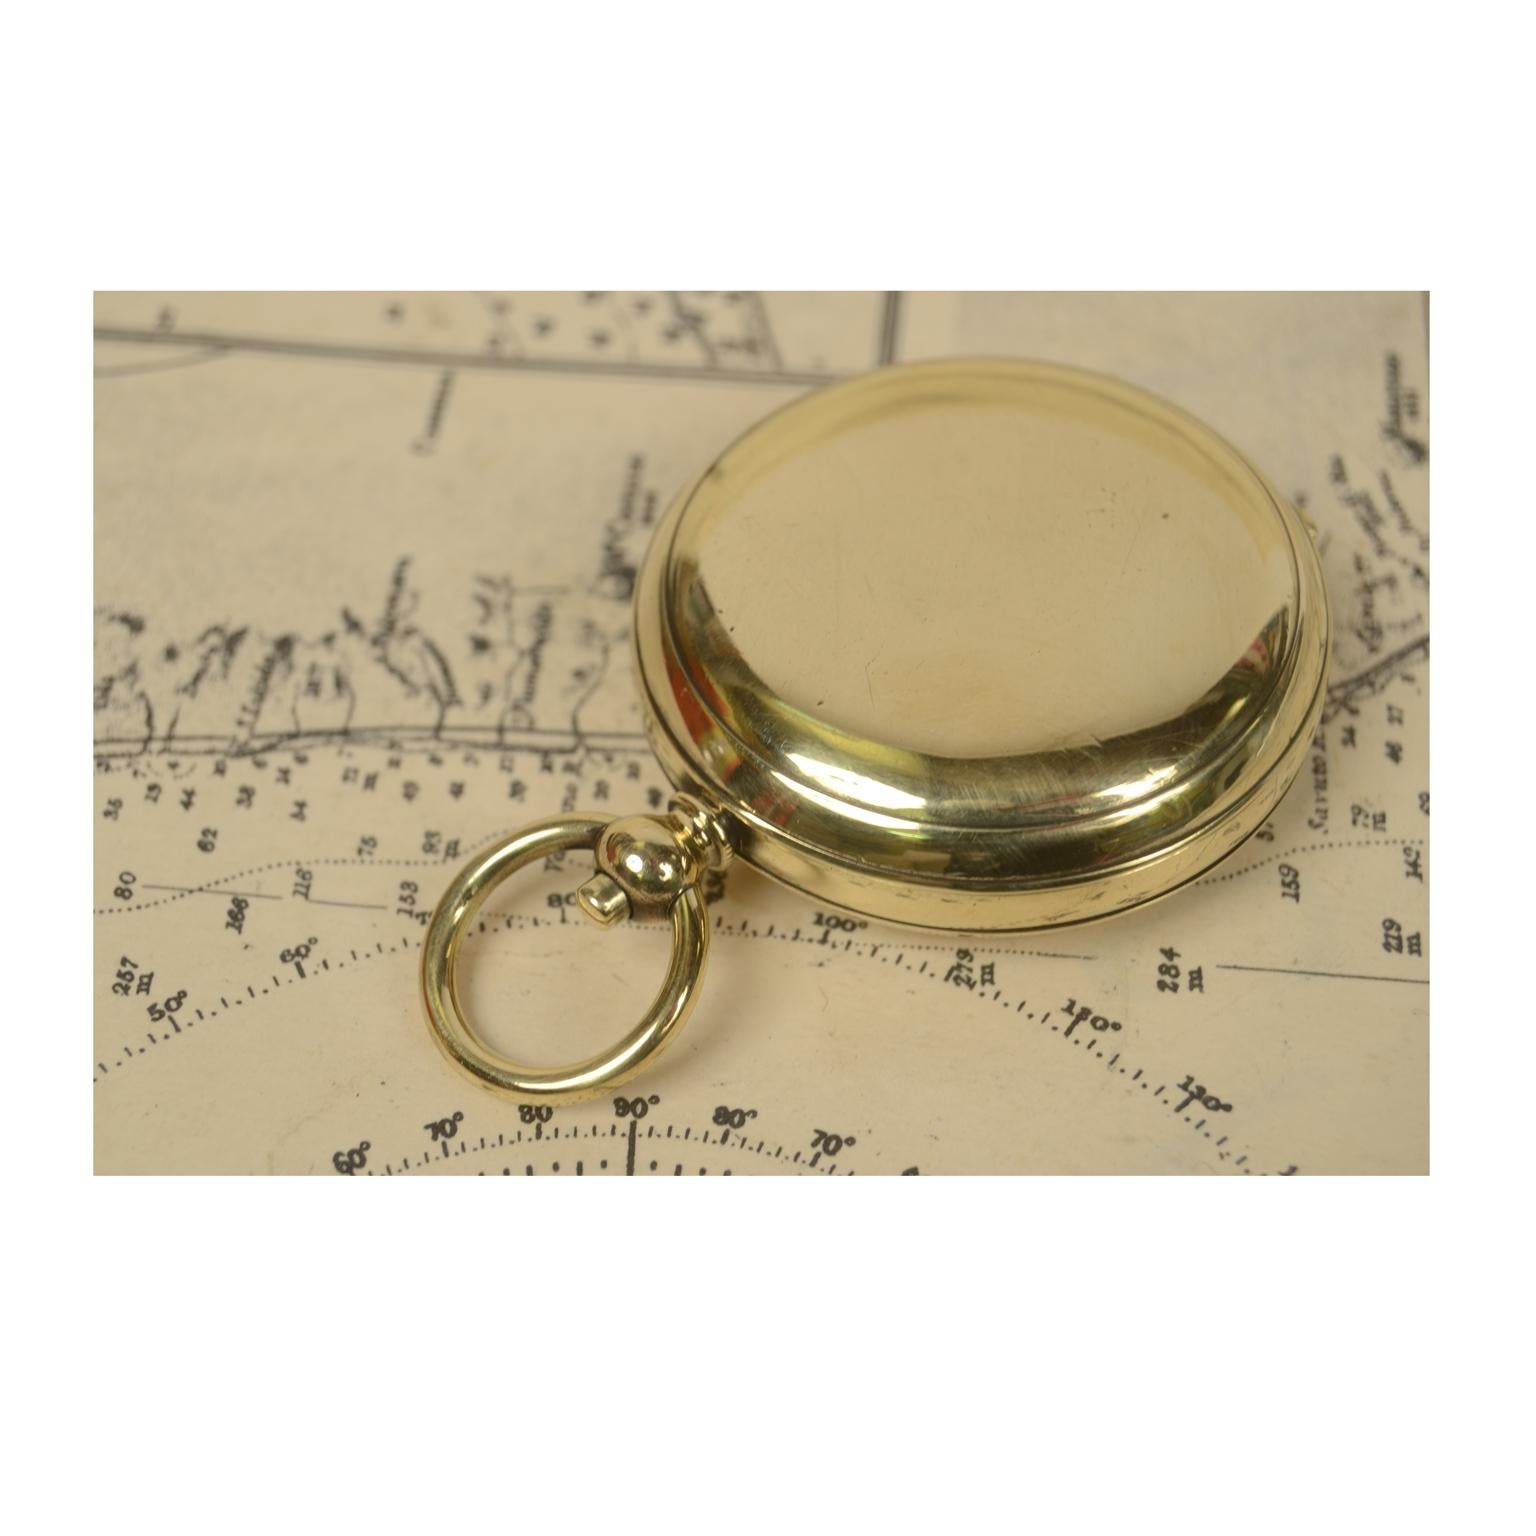 Brass Pocket Compass Used by RAF Officers in the WWI